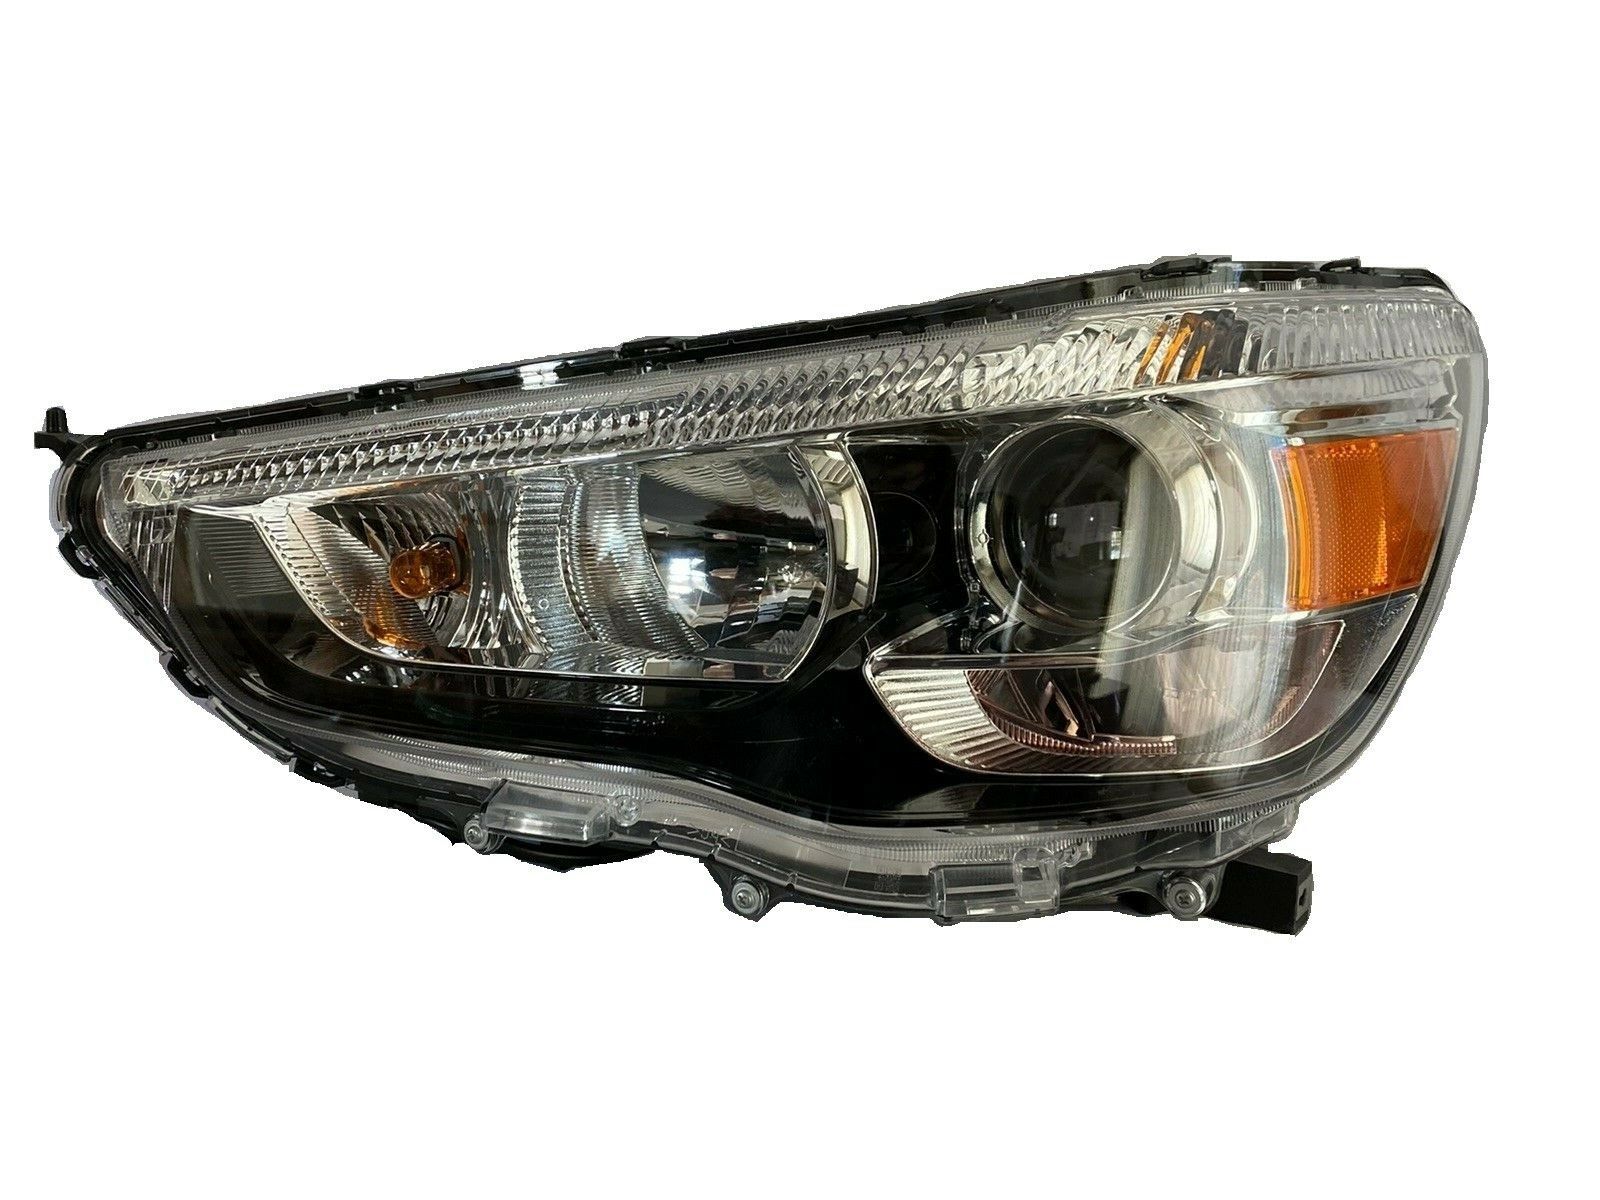 Primary image for FIT MITSUBISHI OUTLANDER SPORT 2011-2019 LEFT HID HEADLIGHT HEAD LIGHT LAMP